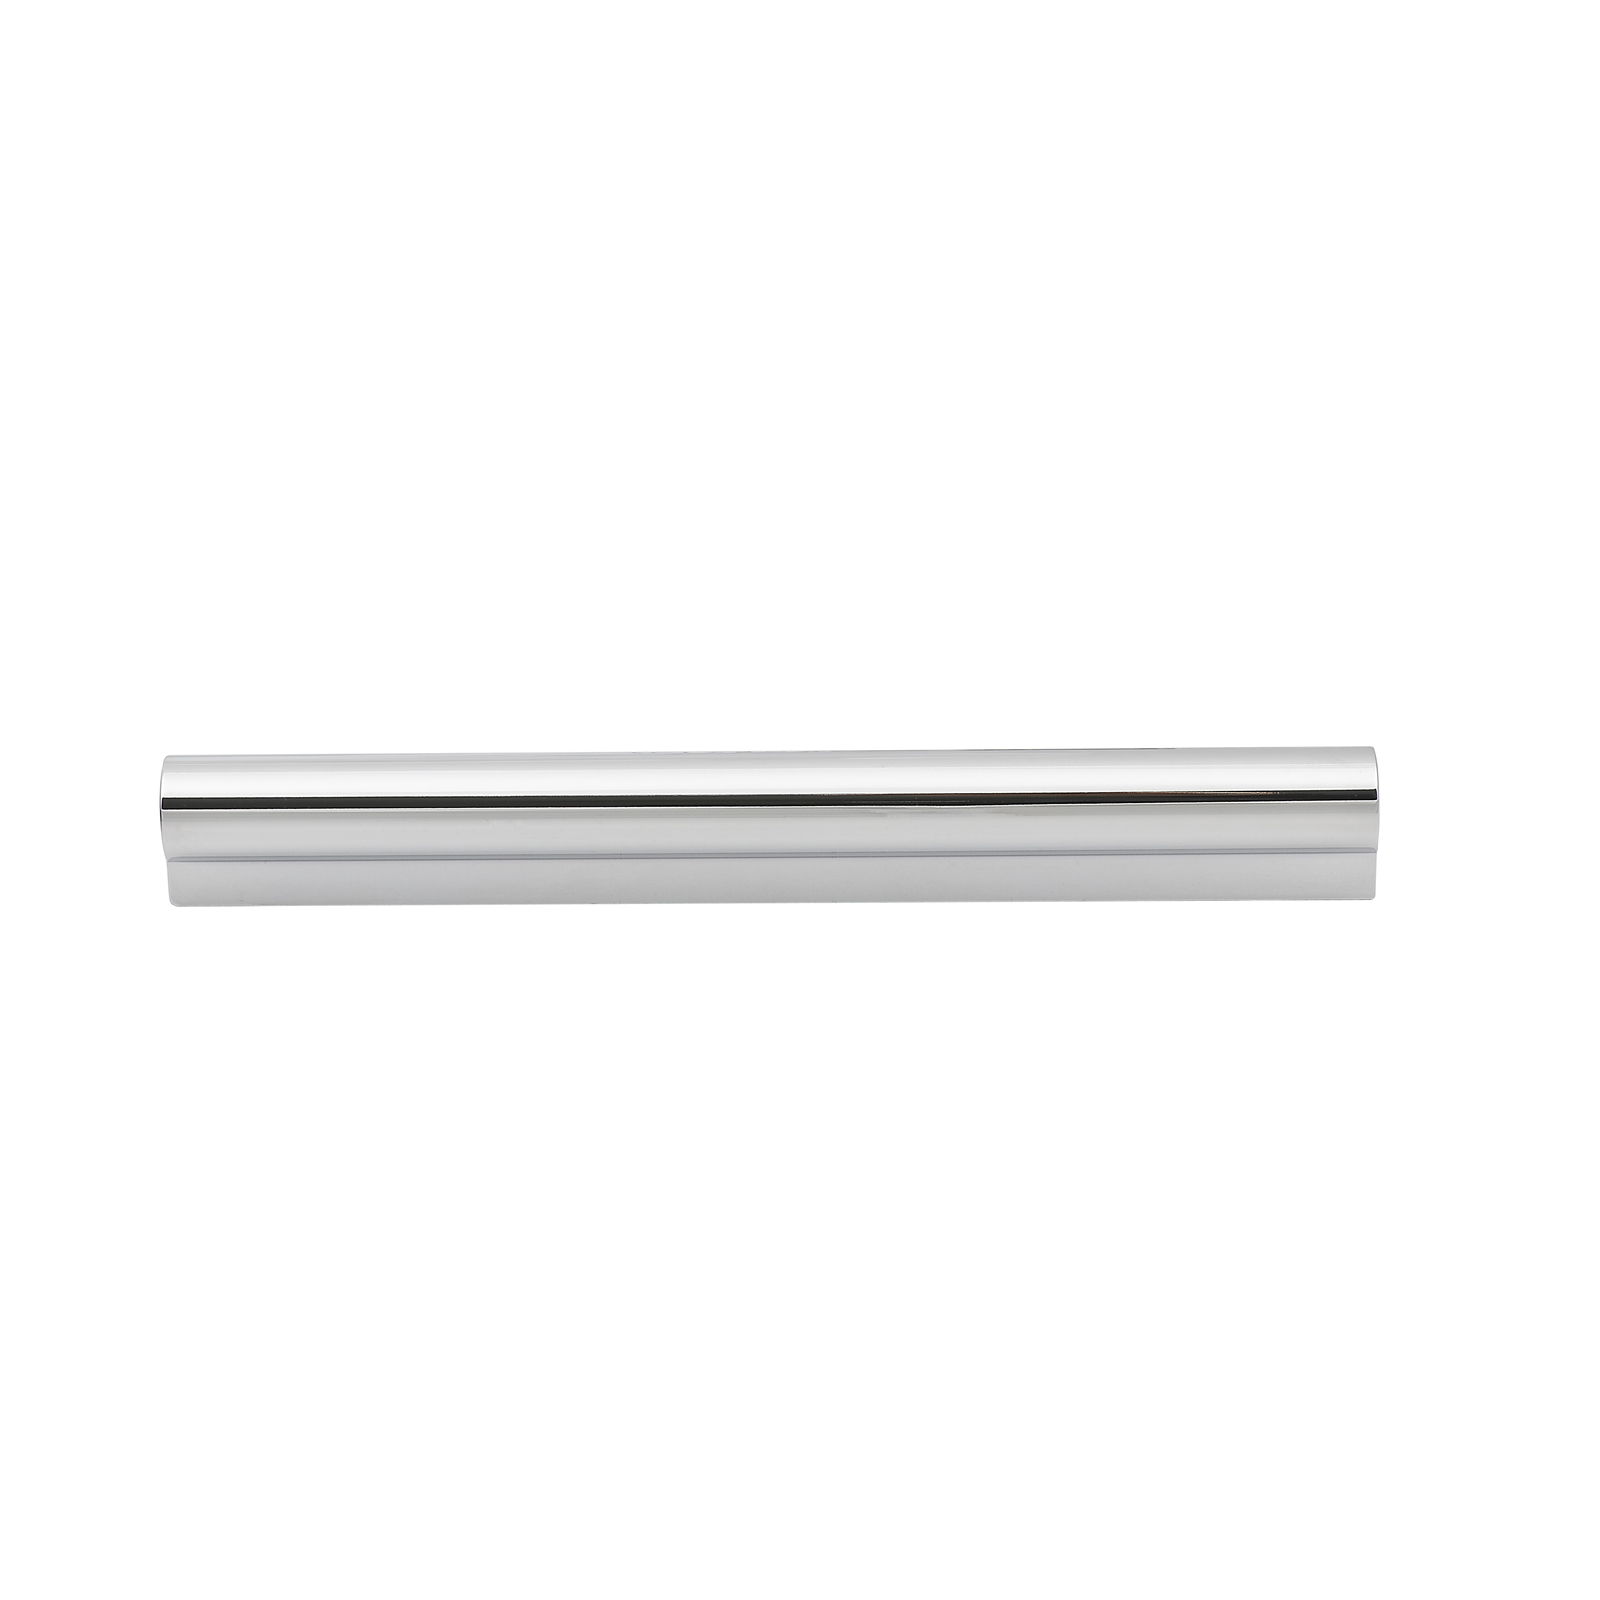 Prestige 96mm Chrome Solid Pipe Pull Handle